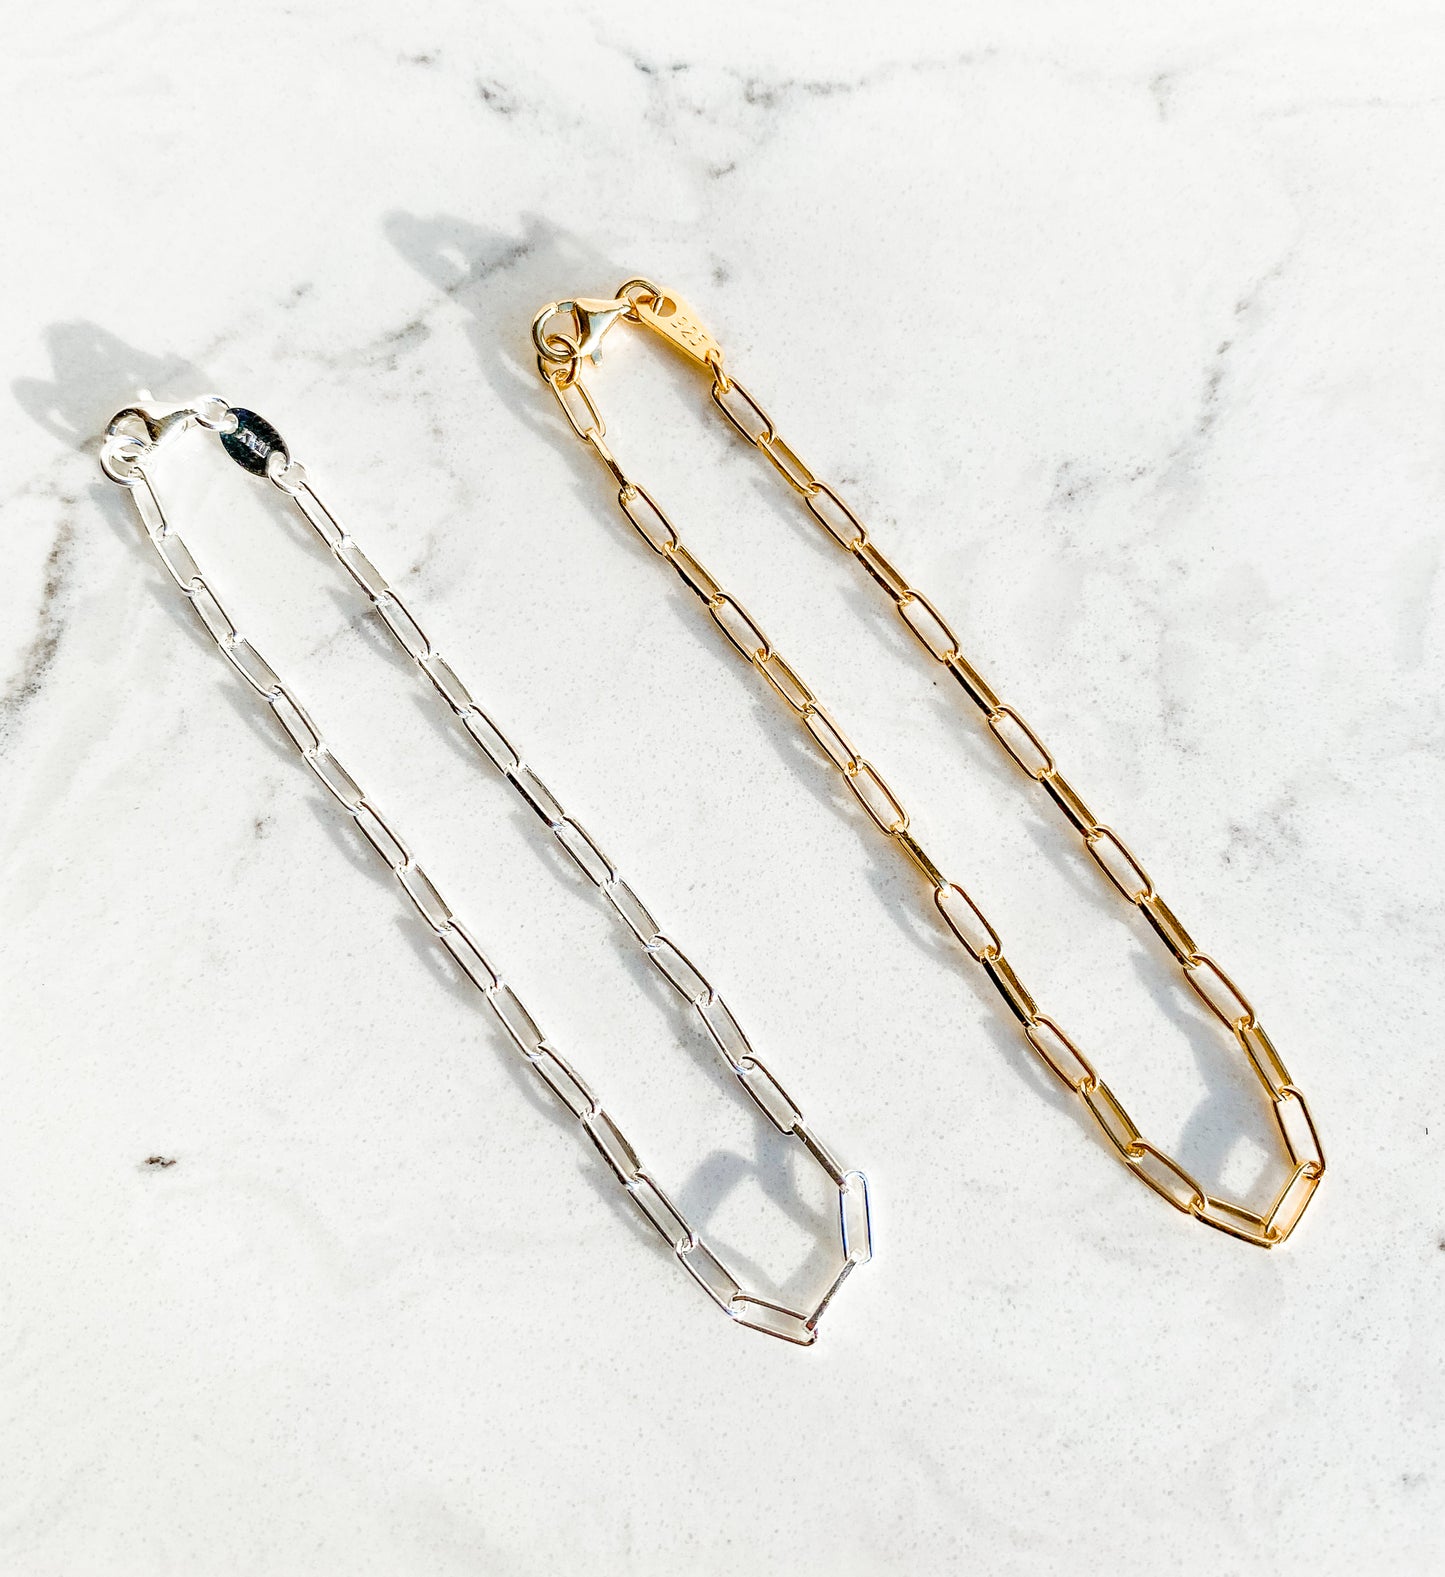 Express your unique style with this 7” paper clip bracelet. Finely crafted in 2.5x6.2mm link 22K yellow gold (over silver) or Sterling Silver, this is a must have for any jewellery collection.